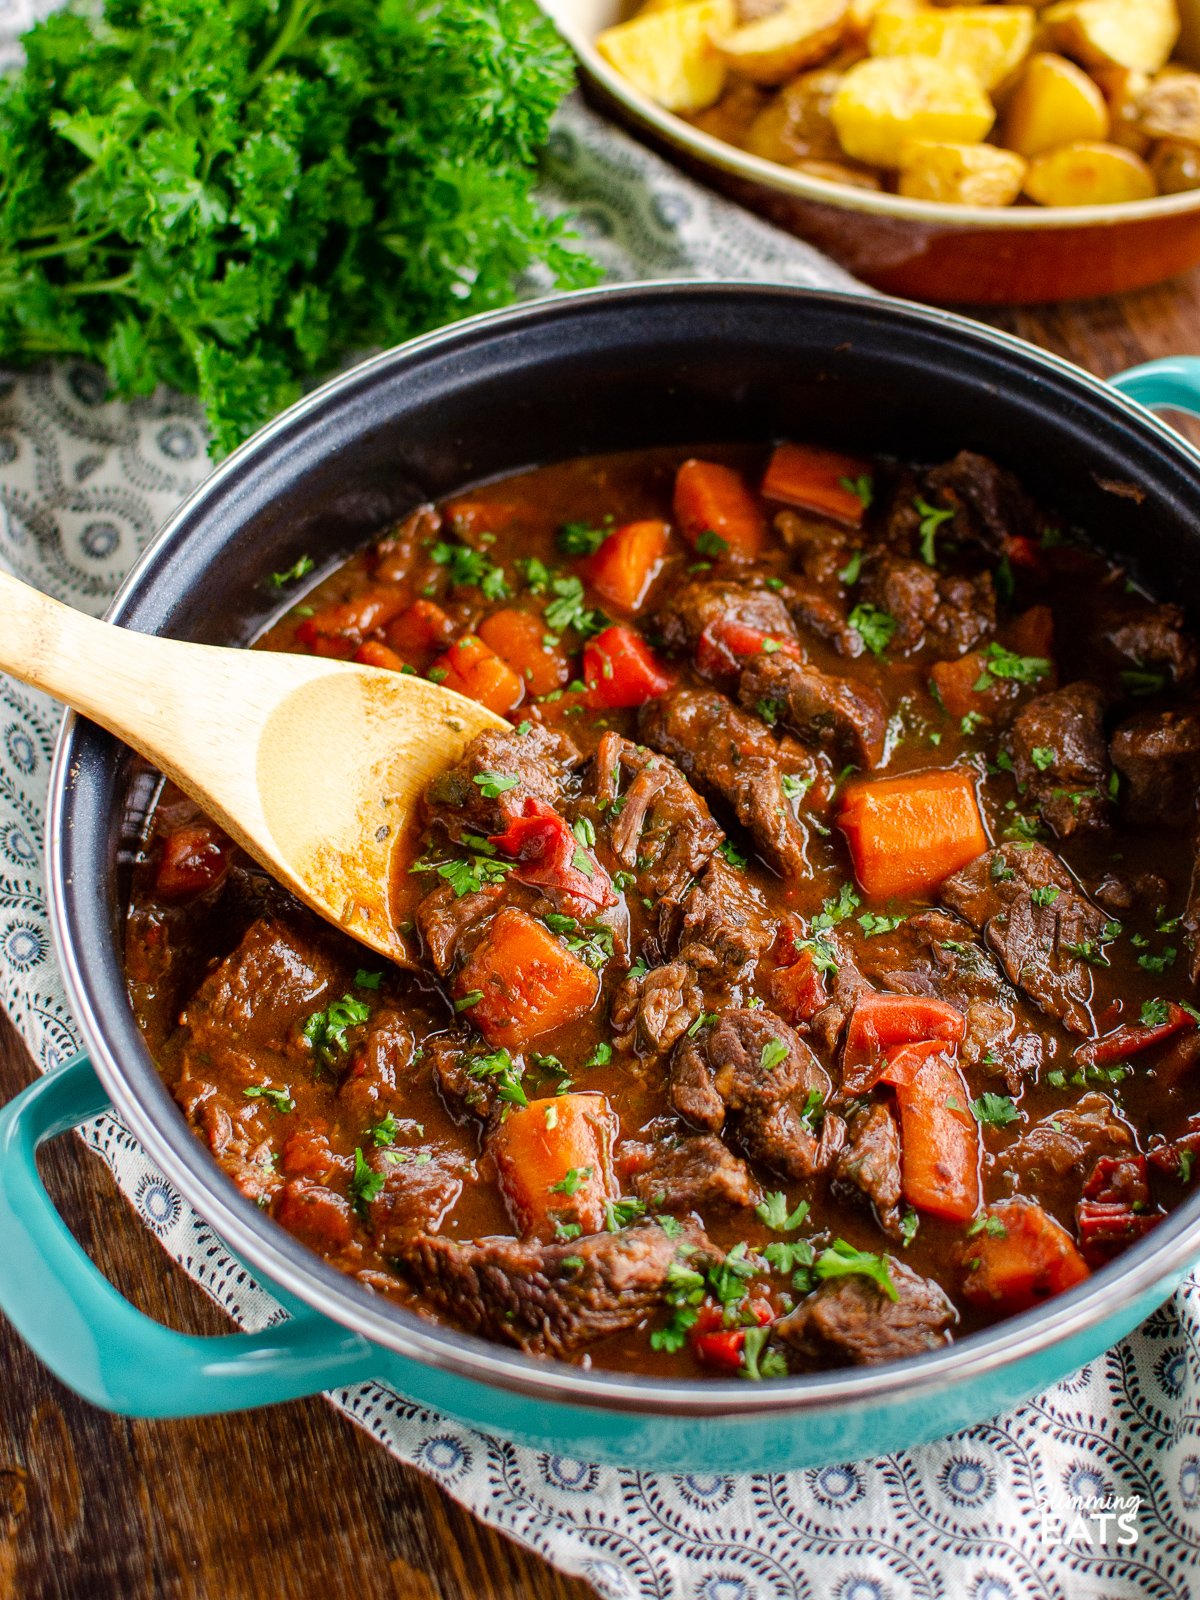 Braised beef with ginger